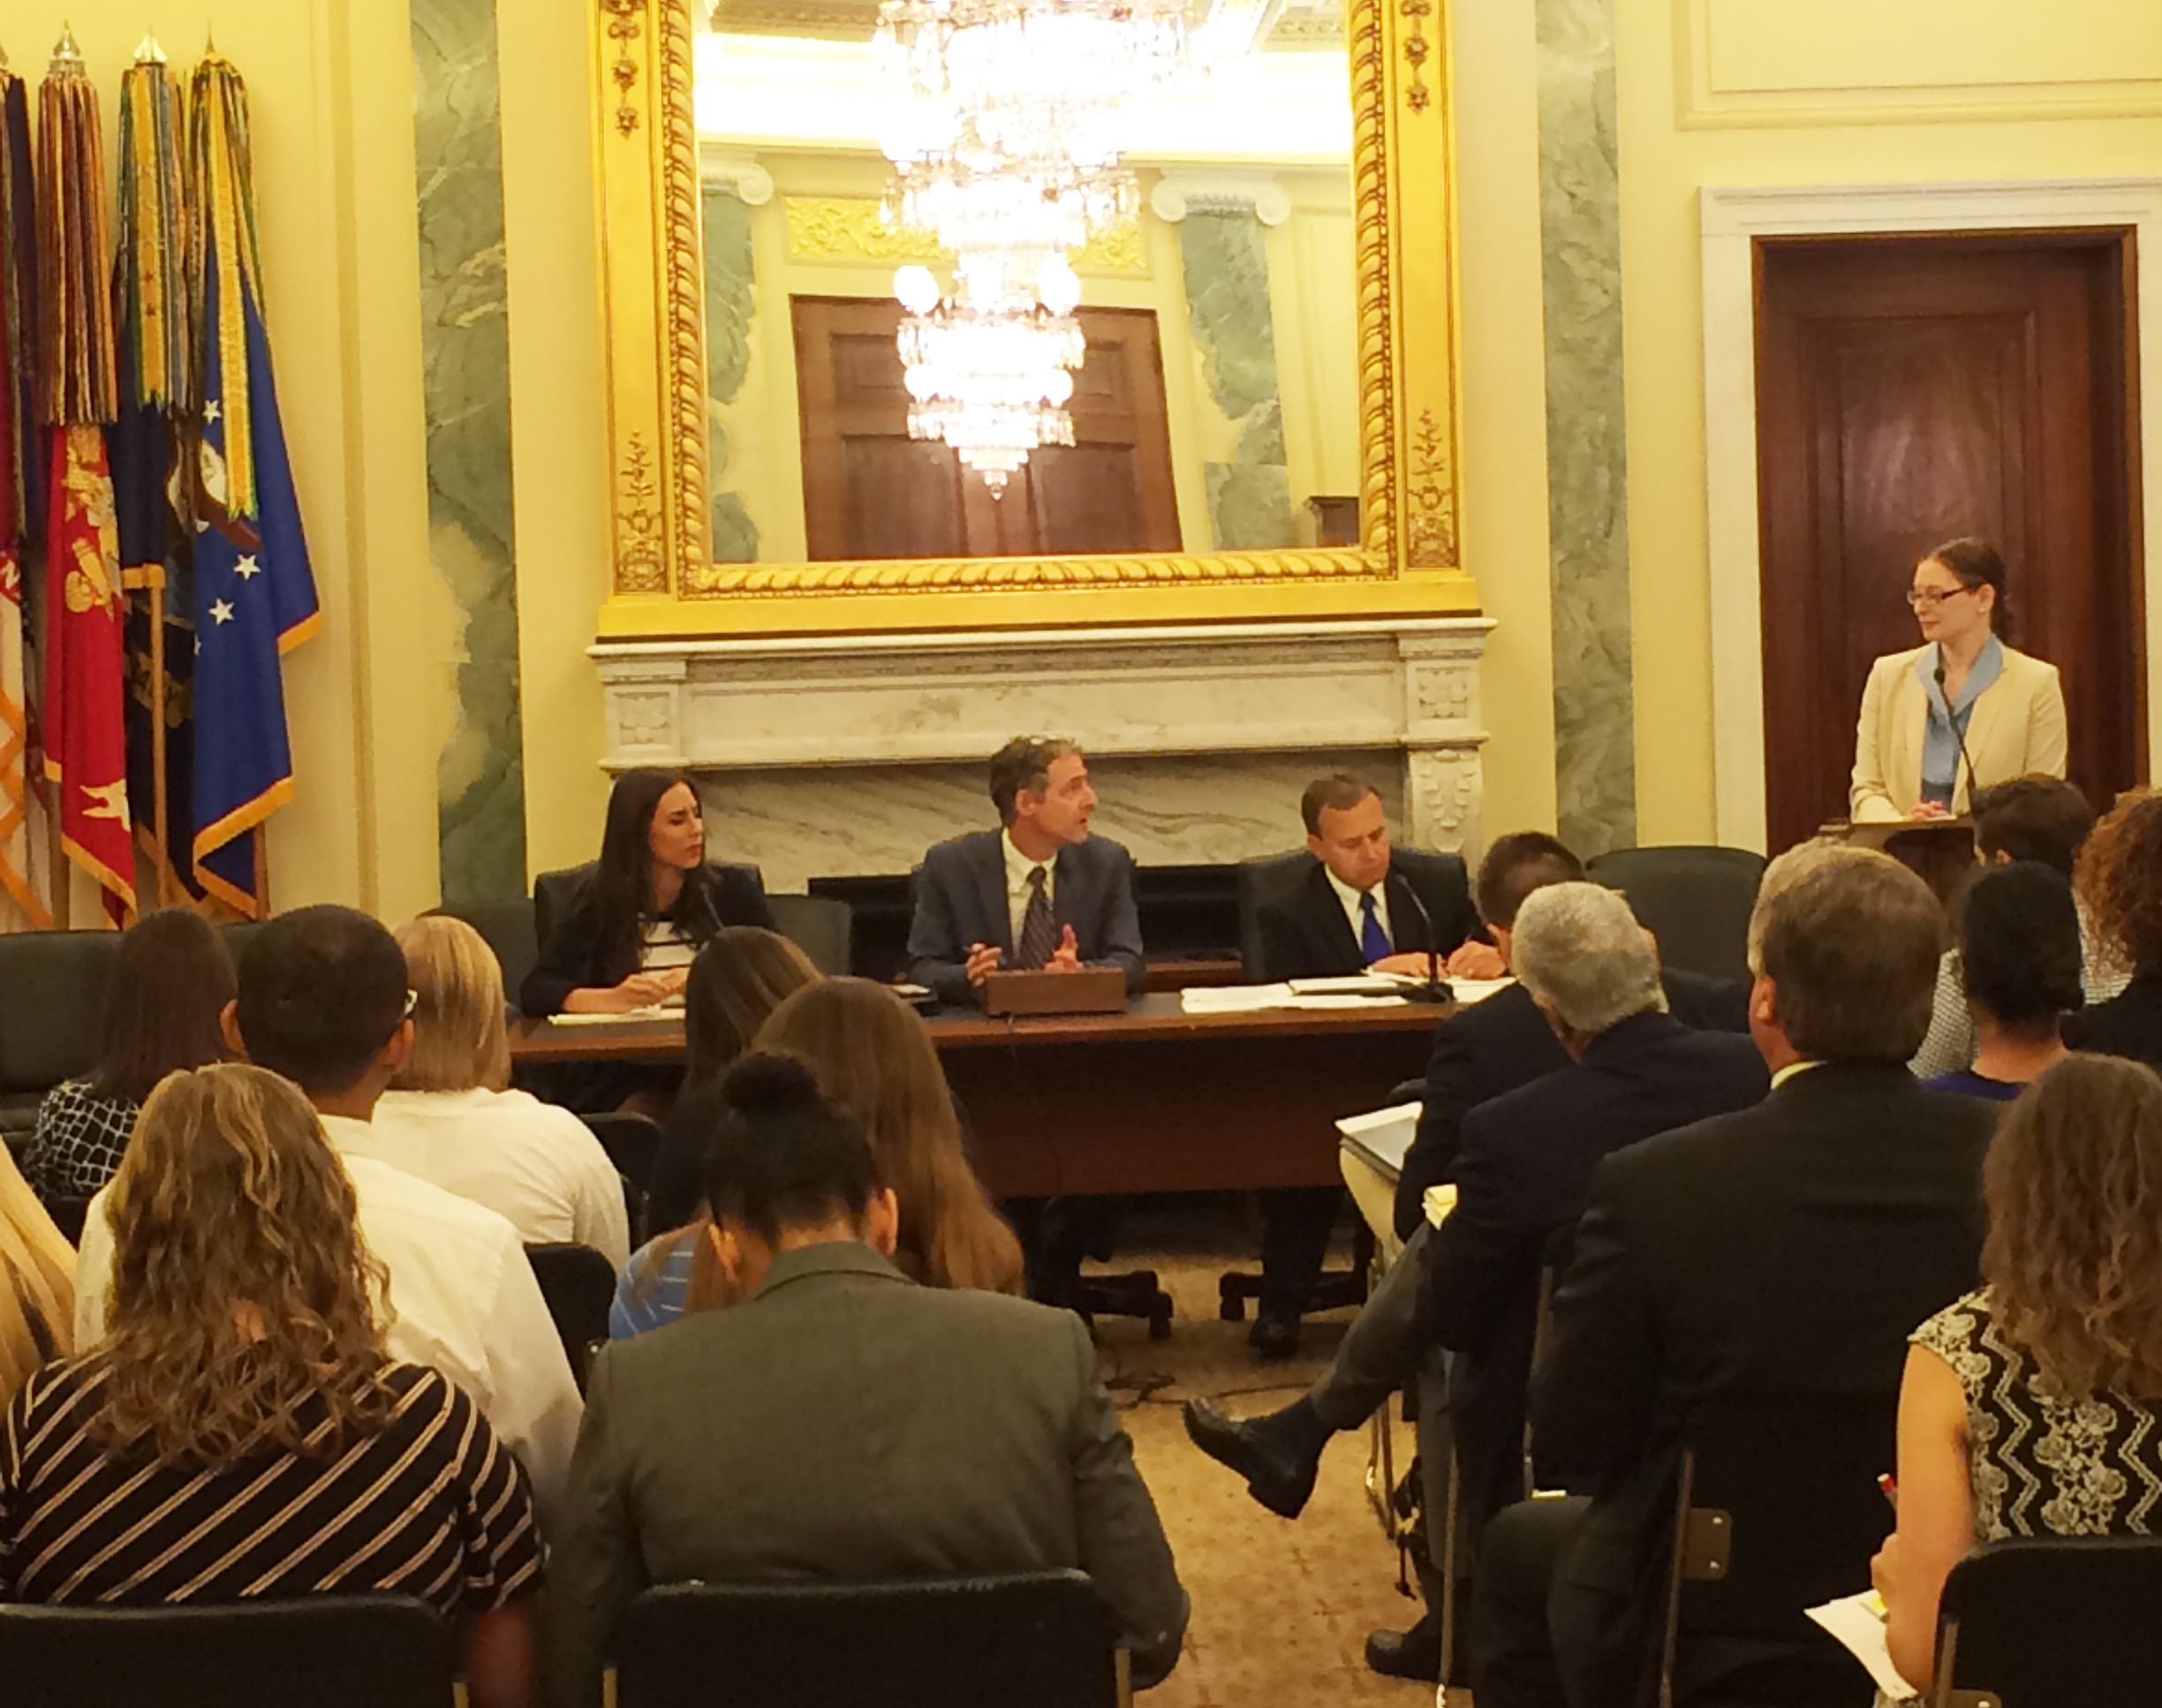 NSC’s Congressional briefing highlights effective adult education and upskilling policies